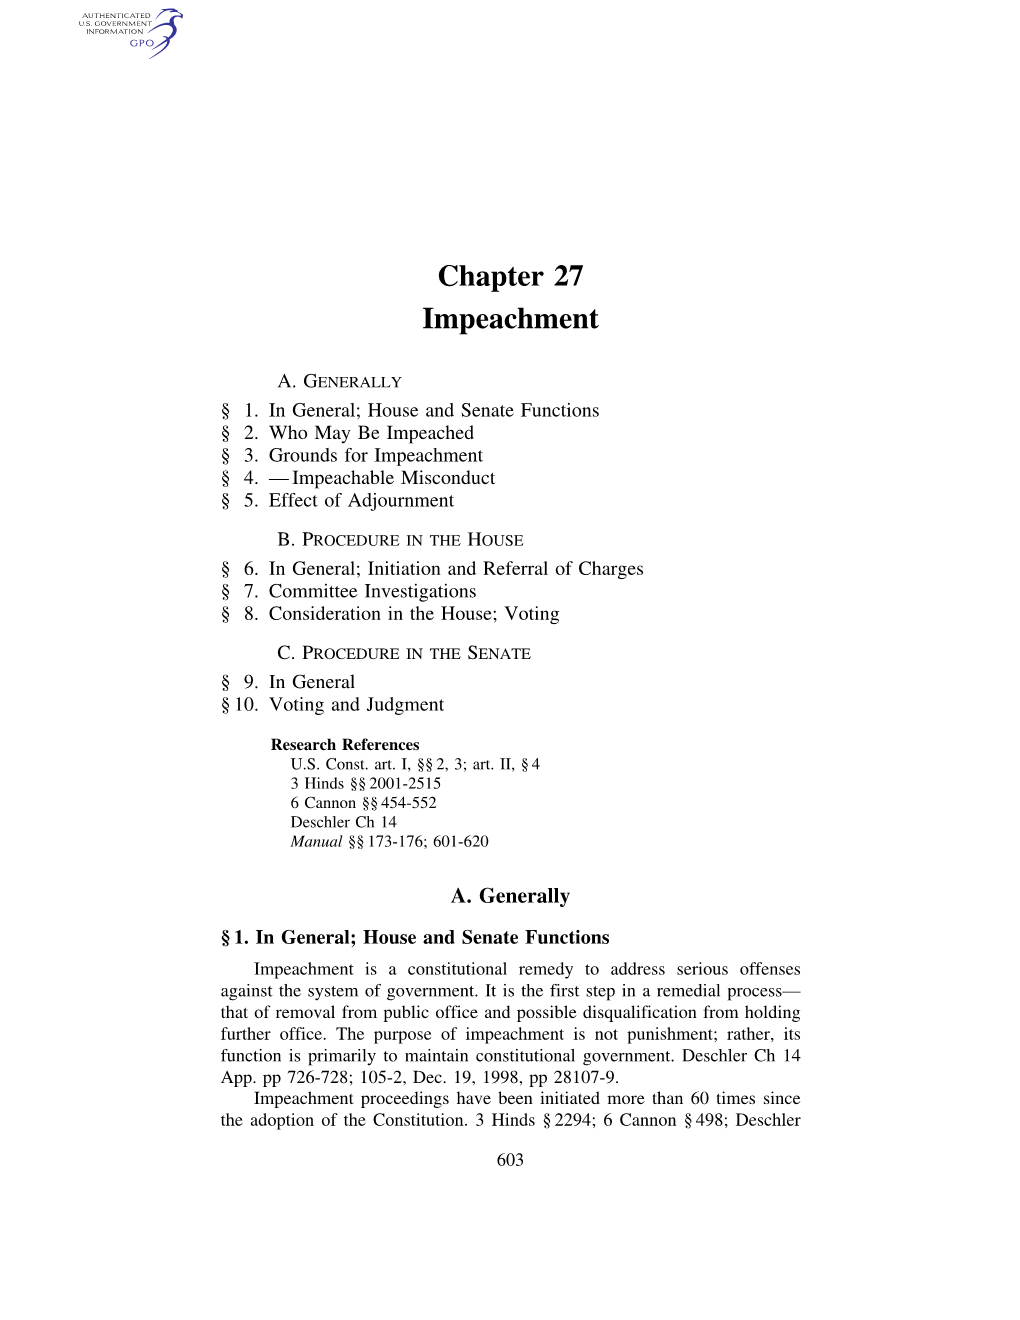 Chapter 27: Impeachment